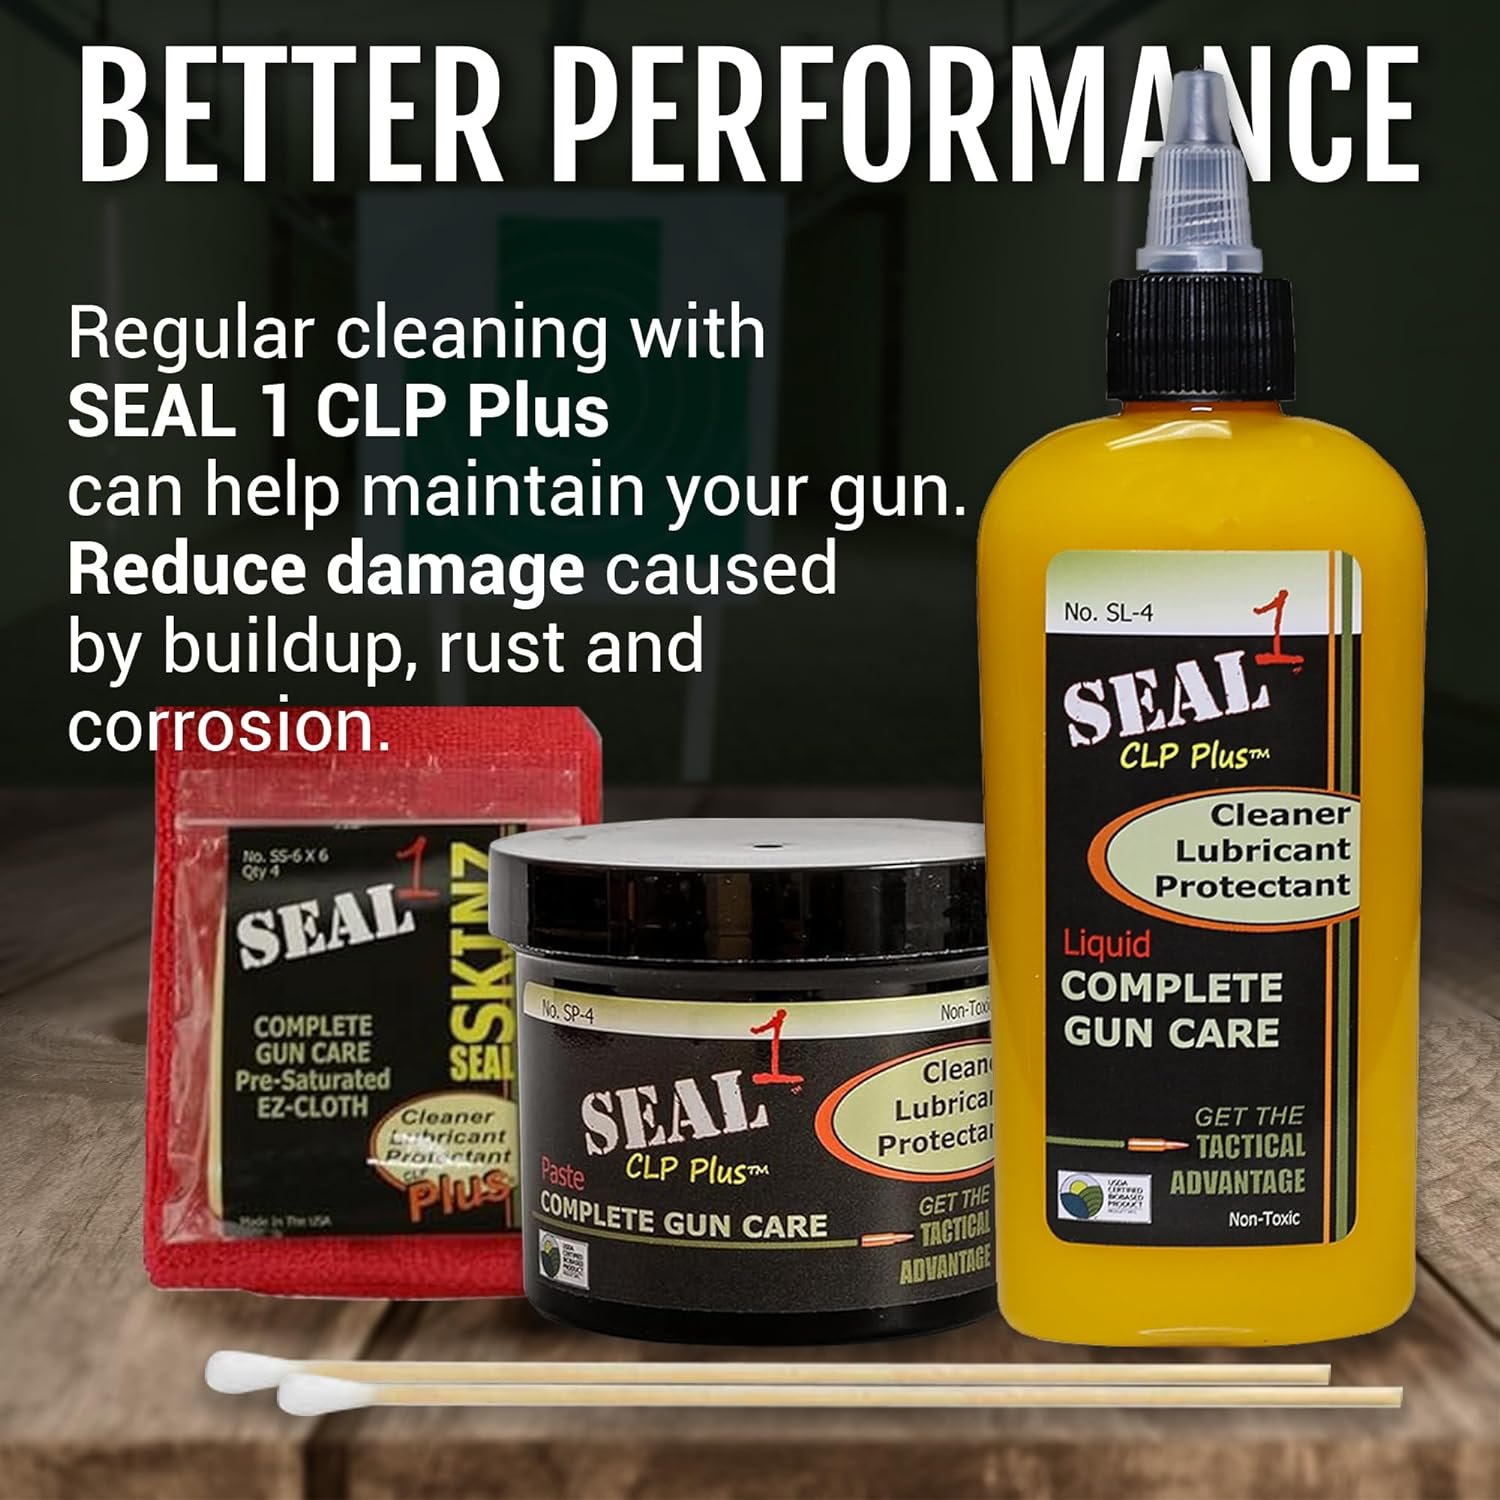 SEAL 1 Universal Cleaning Kit Review